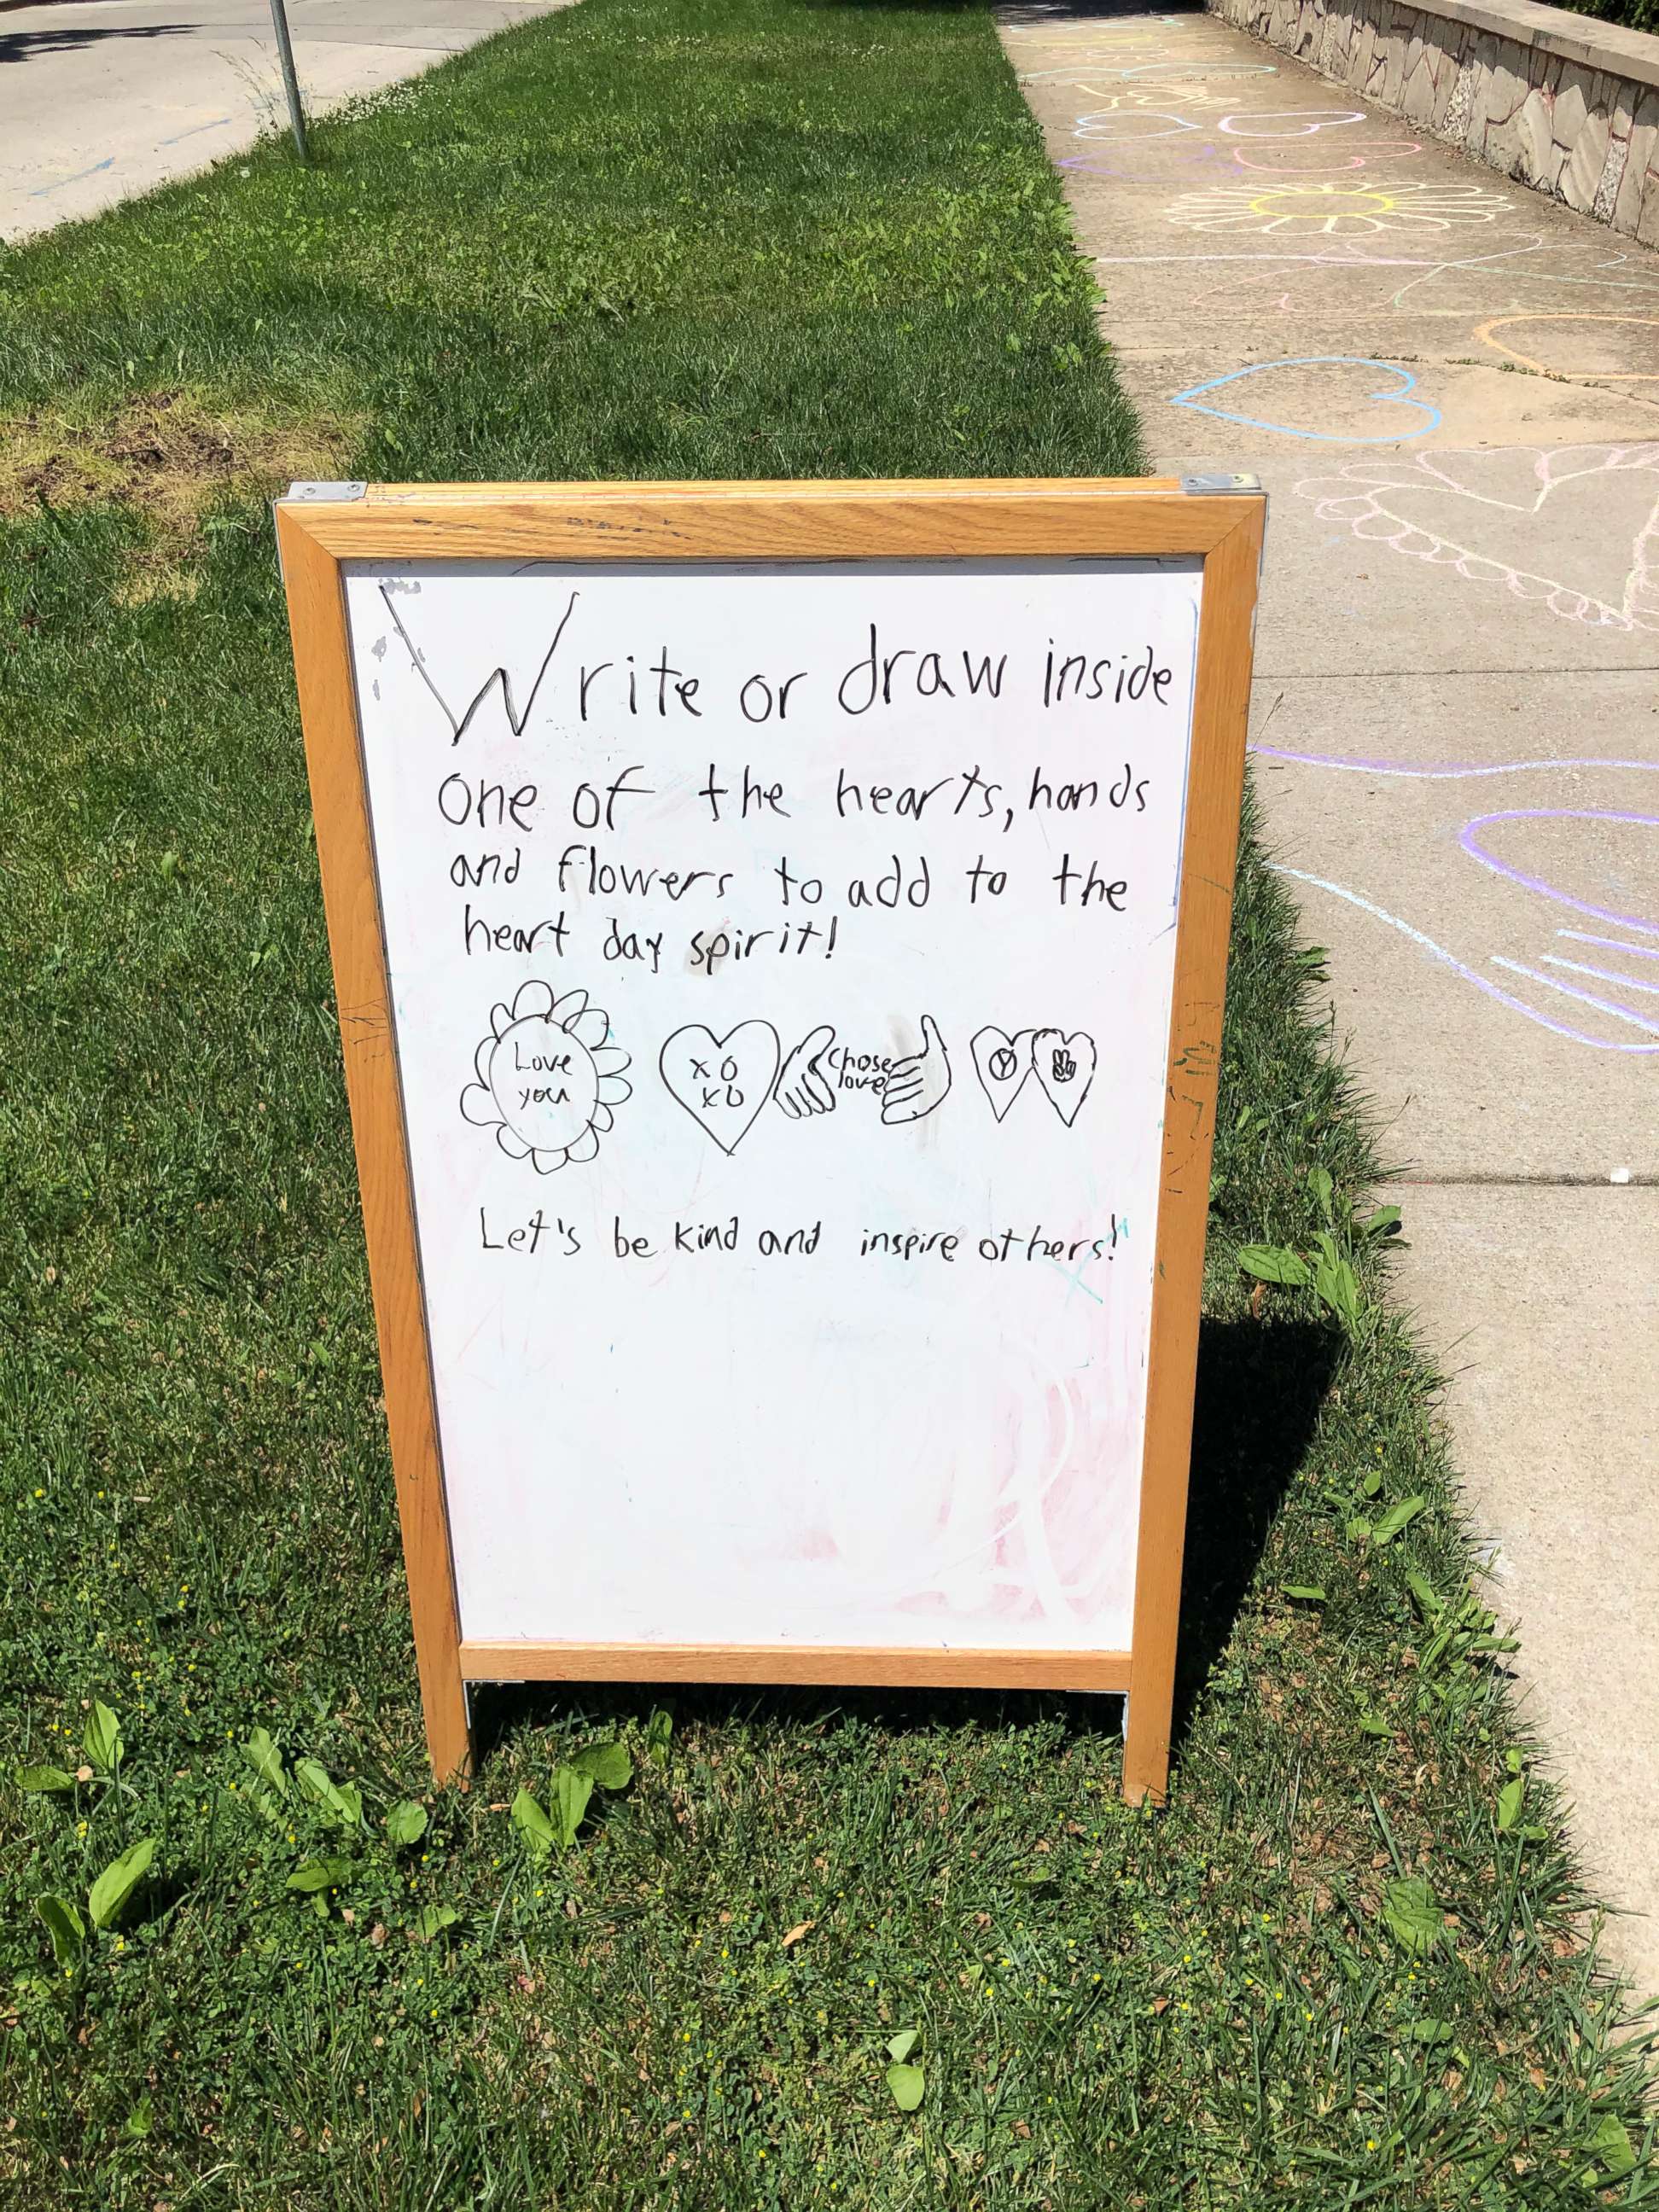 PHOTO: Aiden Kelley, 9, marched and made chalk drawings asked his neighbors to treat each other with respect and kindness in support of the Black Lives Matter movement outside his Chicago home in an undated handout photo.